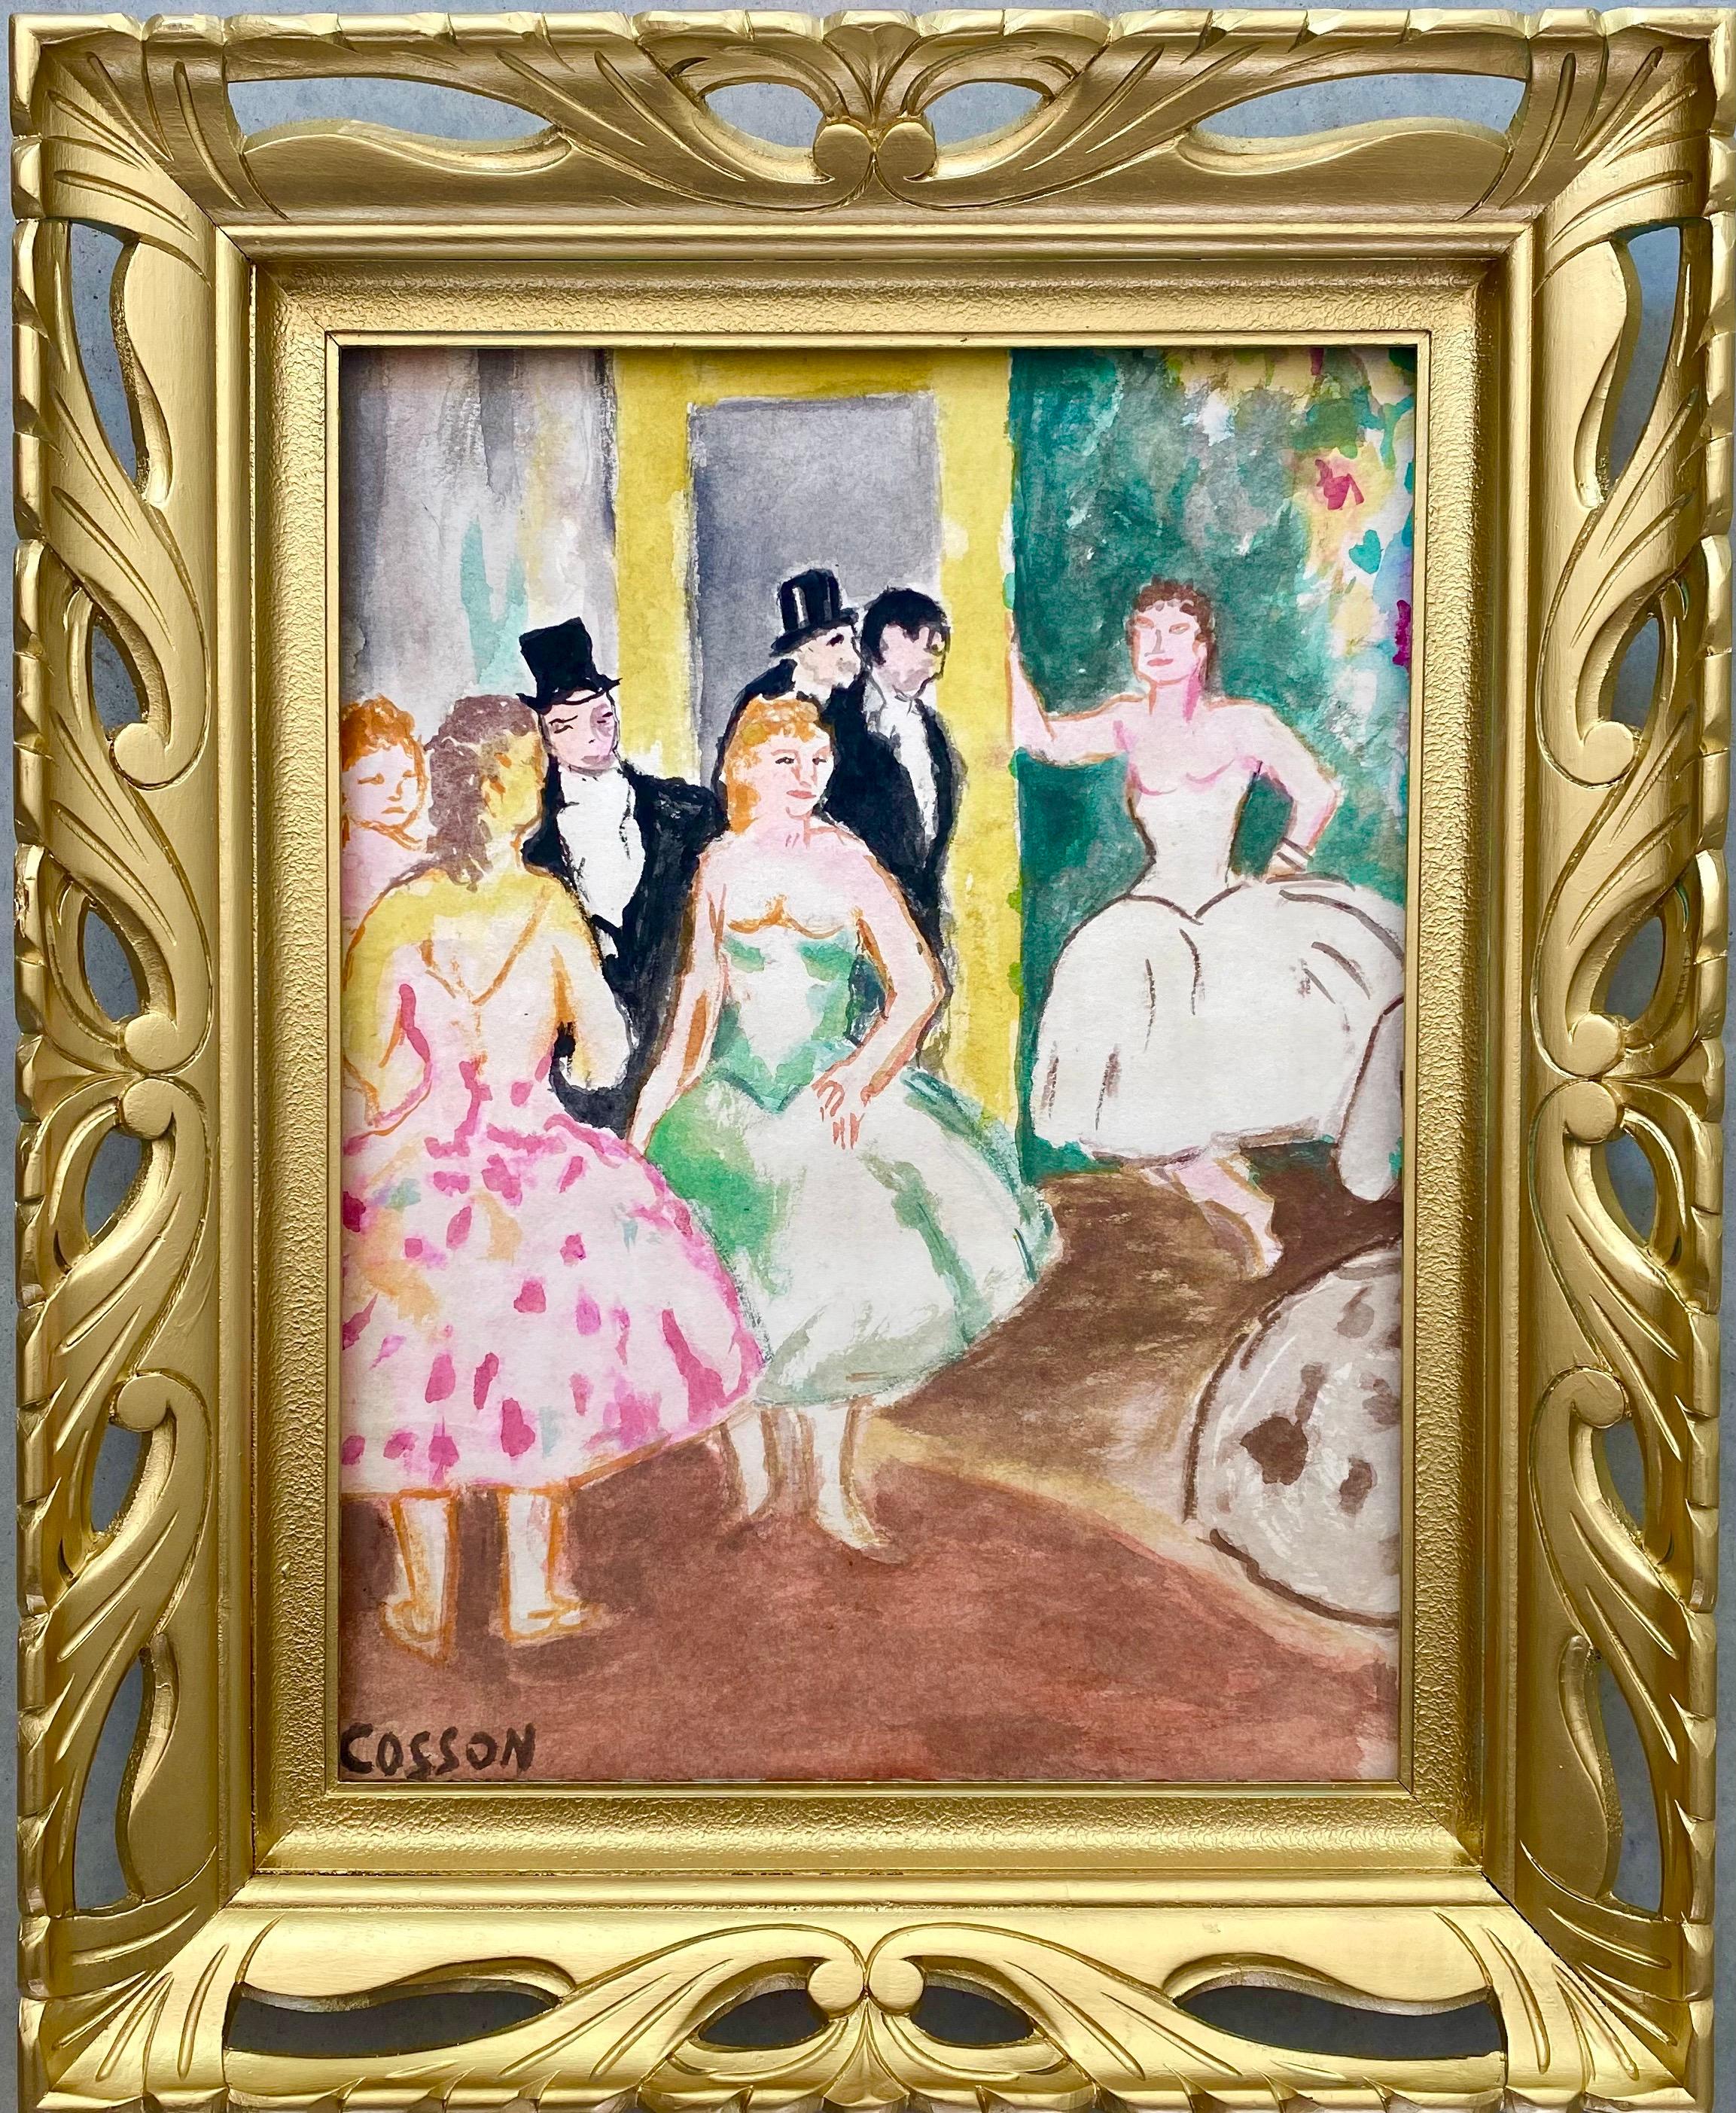 Jean-Louis-Marcel Cosson Interior Painting - French Post Impressionist gouache painting - L'Opéra - Degas Dancers Dance 1930s